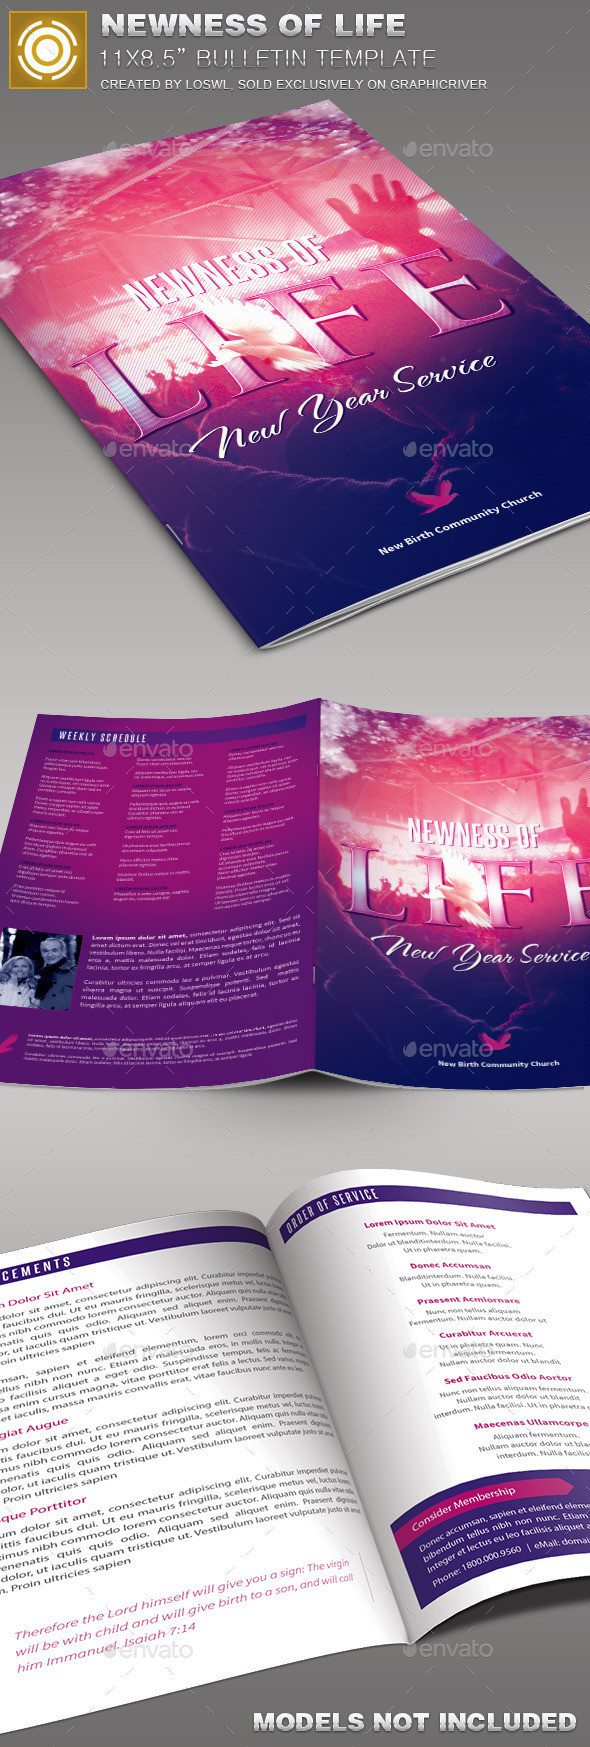 Newness of life bulletin template image preview